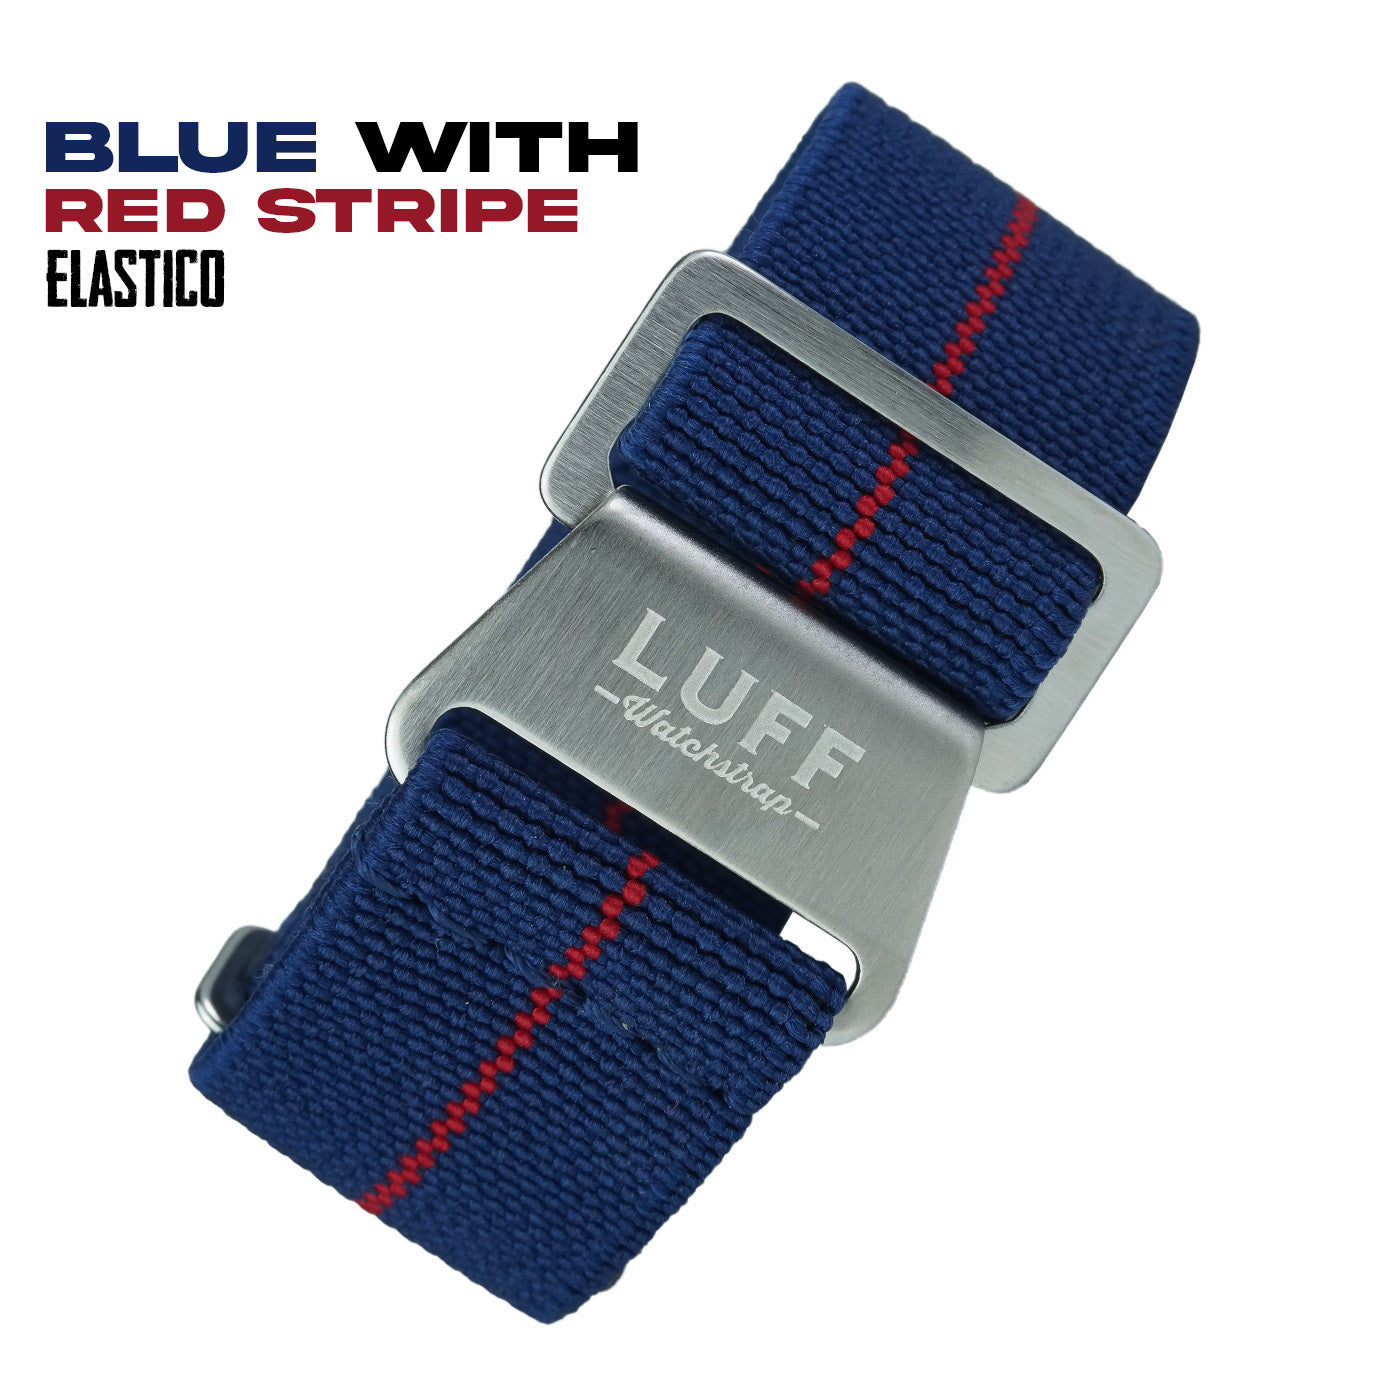 Blue with Red Stripe (6903641800791)